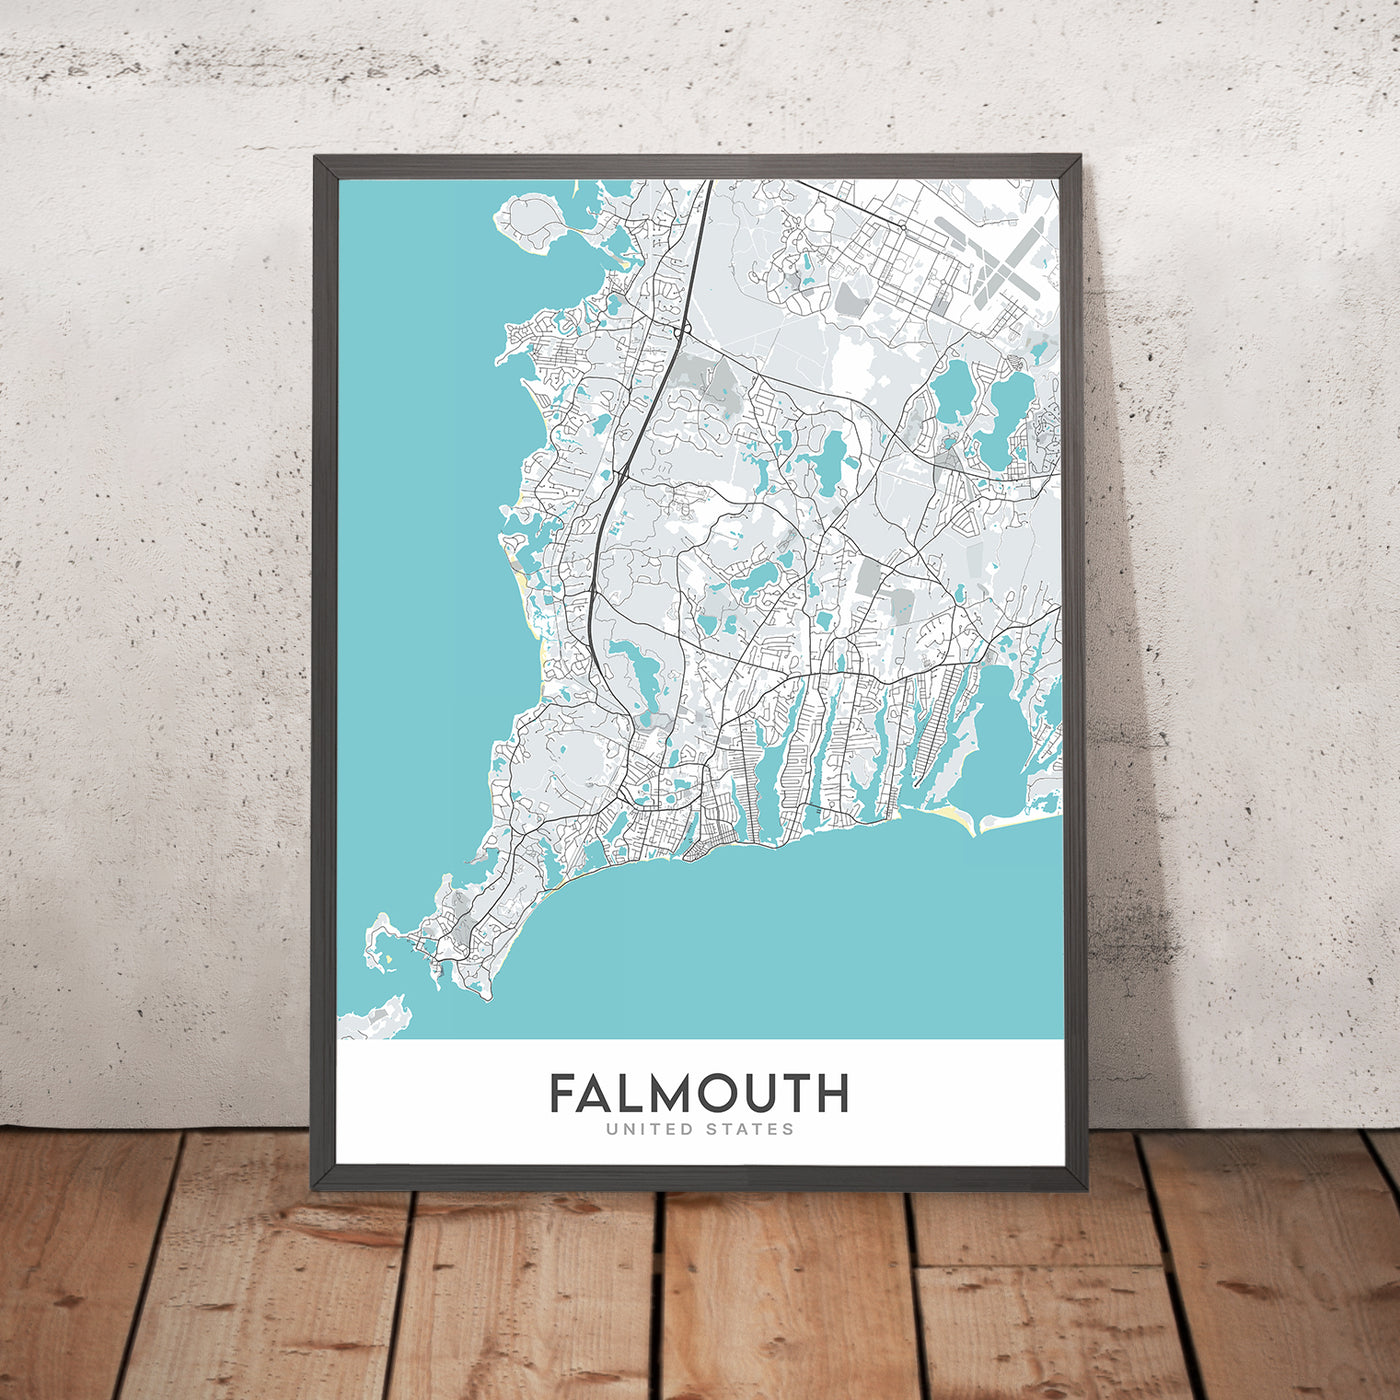 Modern City Map of Falmouth, MA: Falmouth Harbor, Nobska Point, Oceanographic Institution, Marine Laboratory, Falmouth Heights